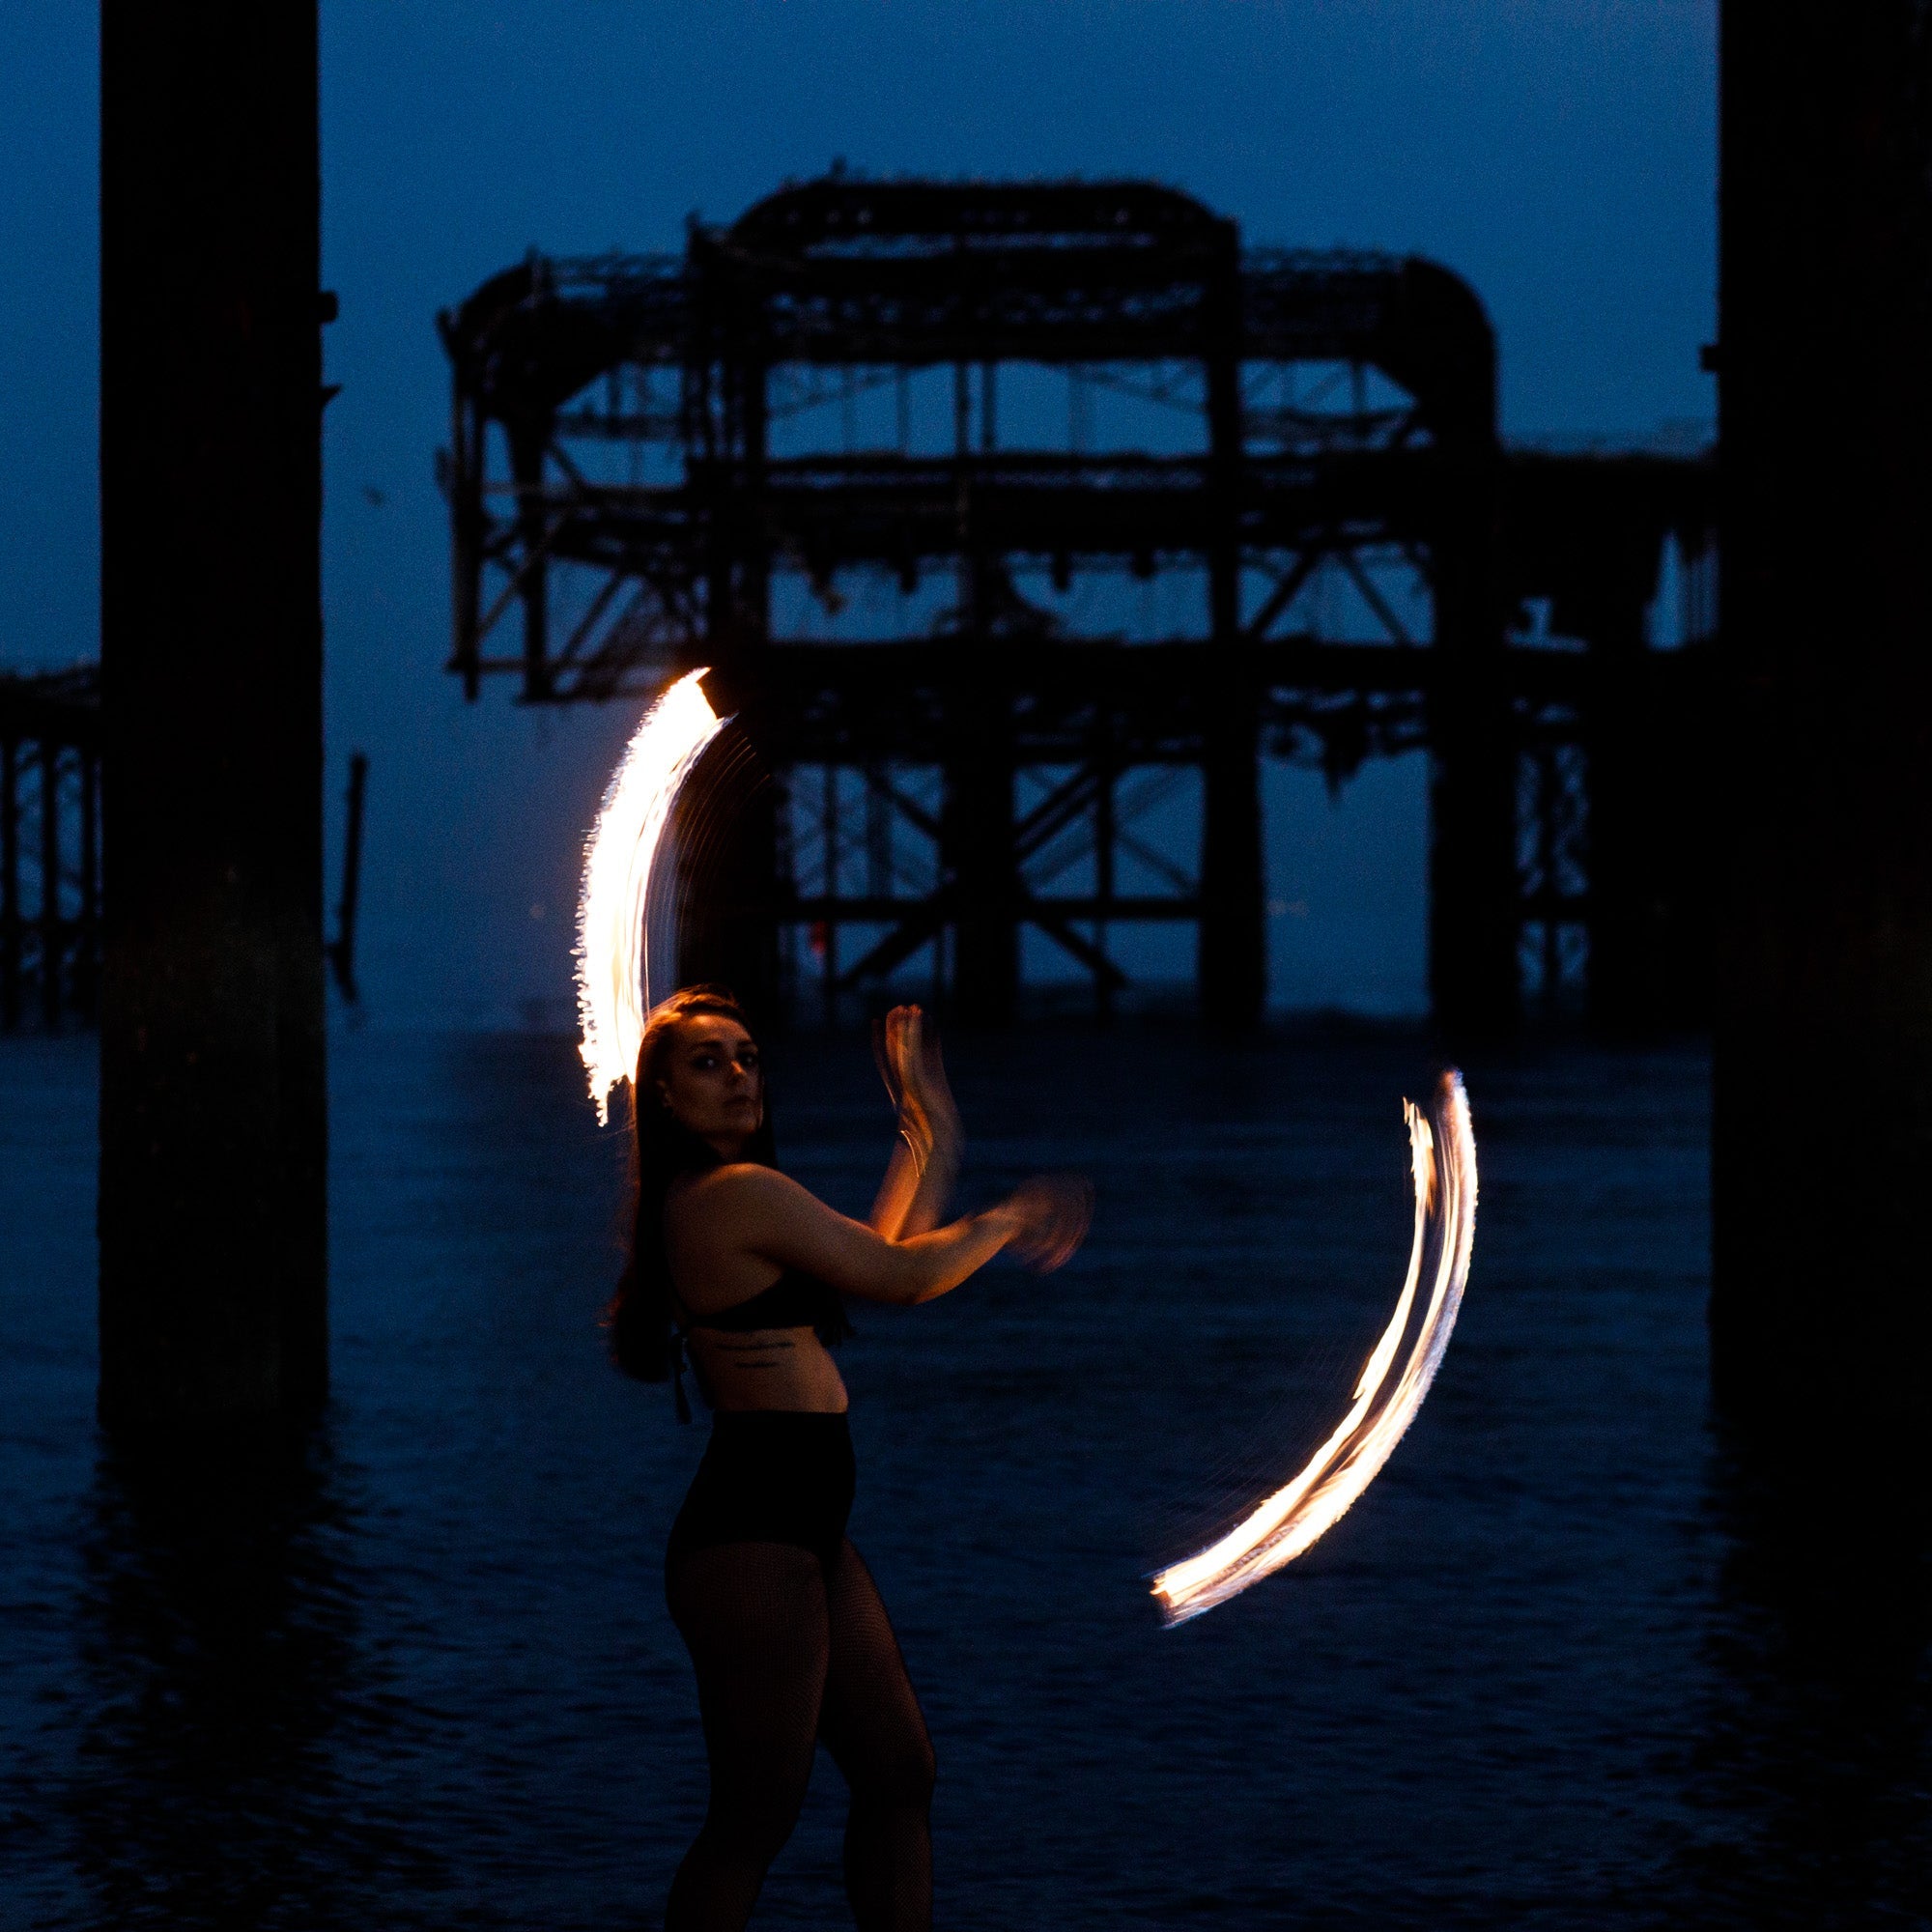 Person spinning fire poi at night